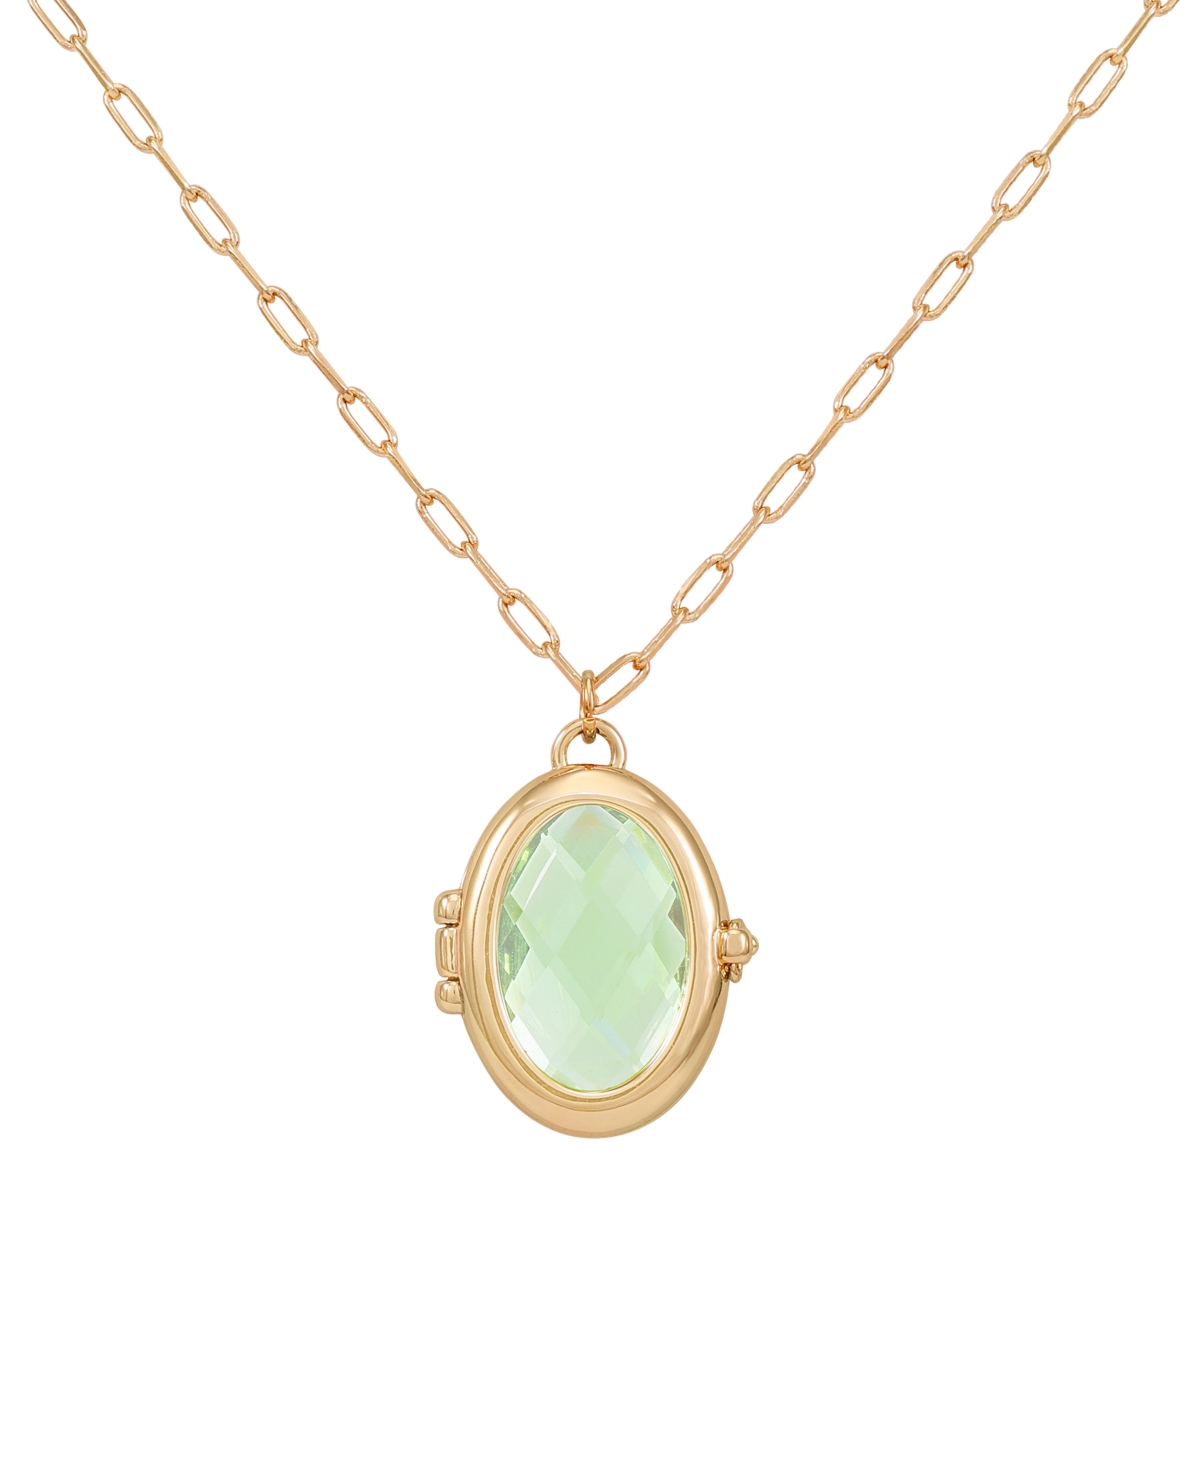 Guess Gold-tone Removable Stone Oval Locket Pendant Necklace, 18" + 3" Extender In Gold,peridot